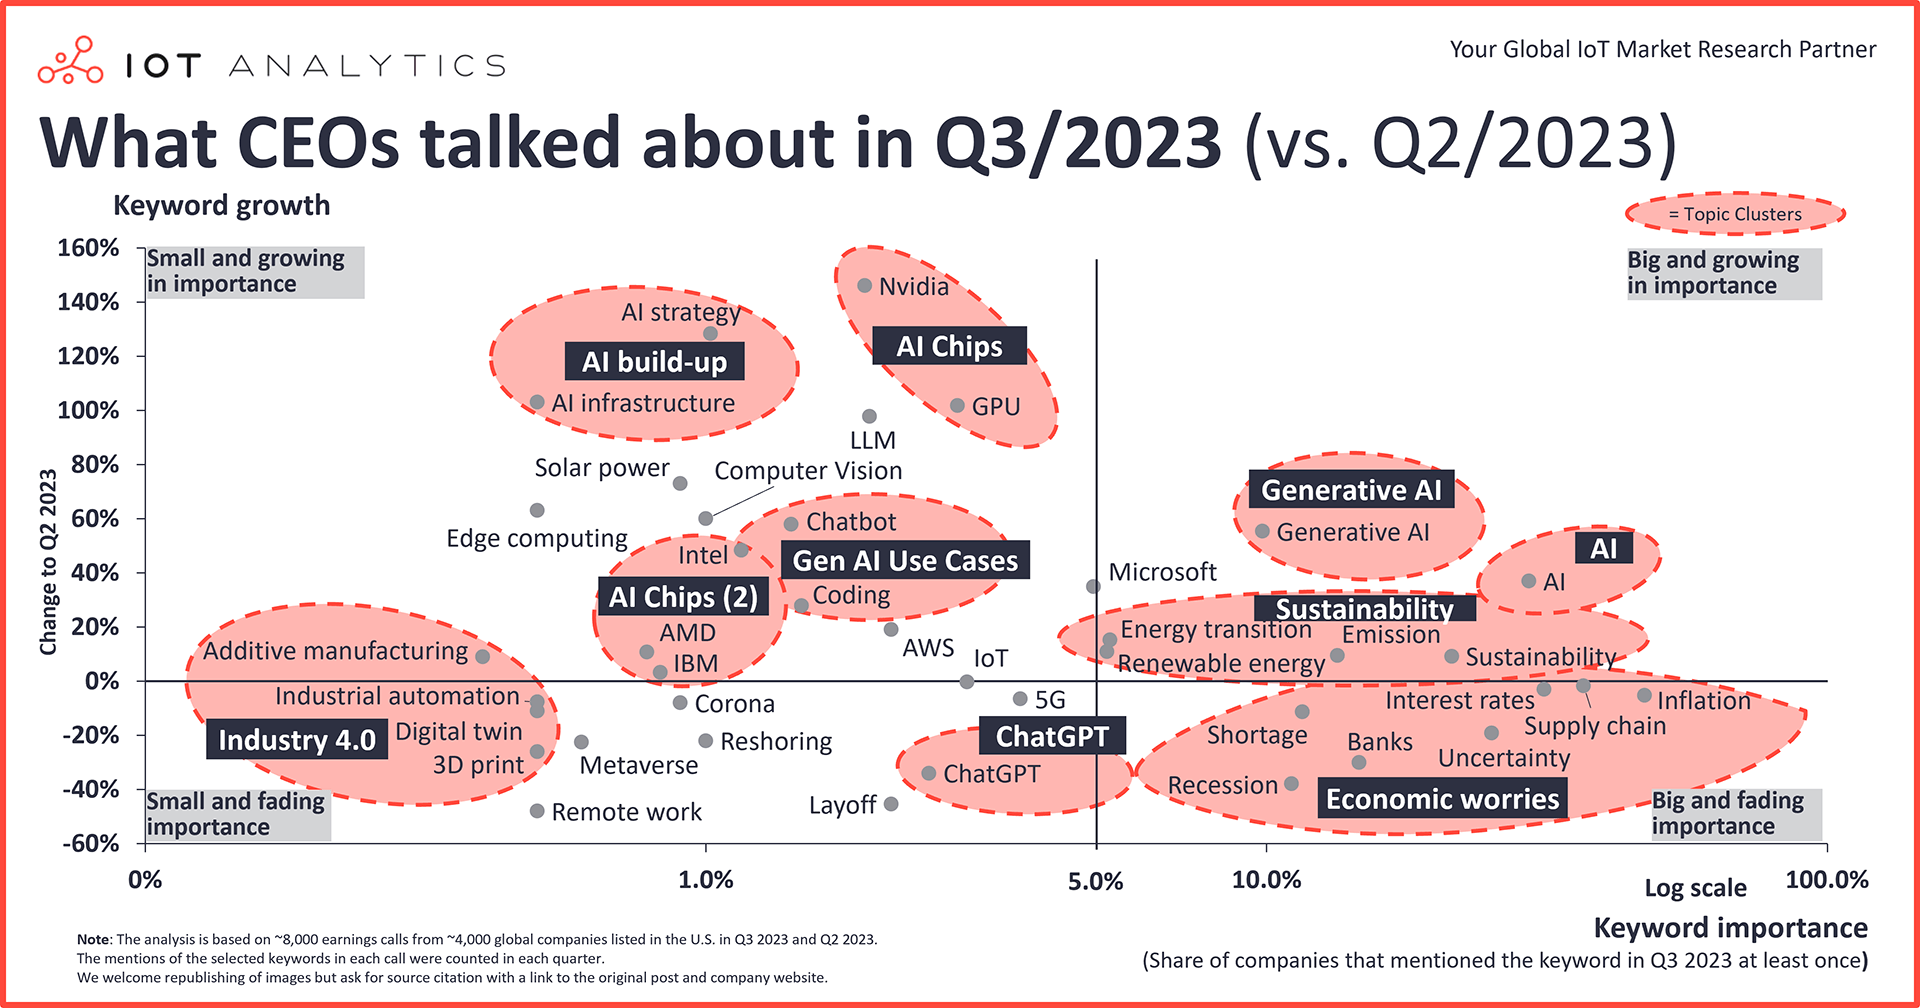 What CEOs talked about in Q3 2023 vs Q2 2023